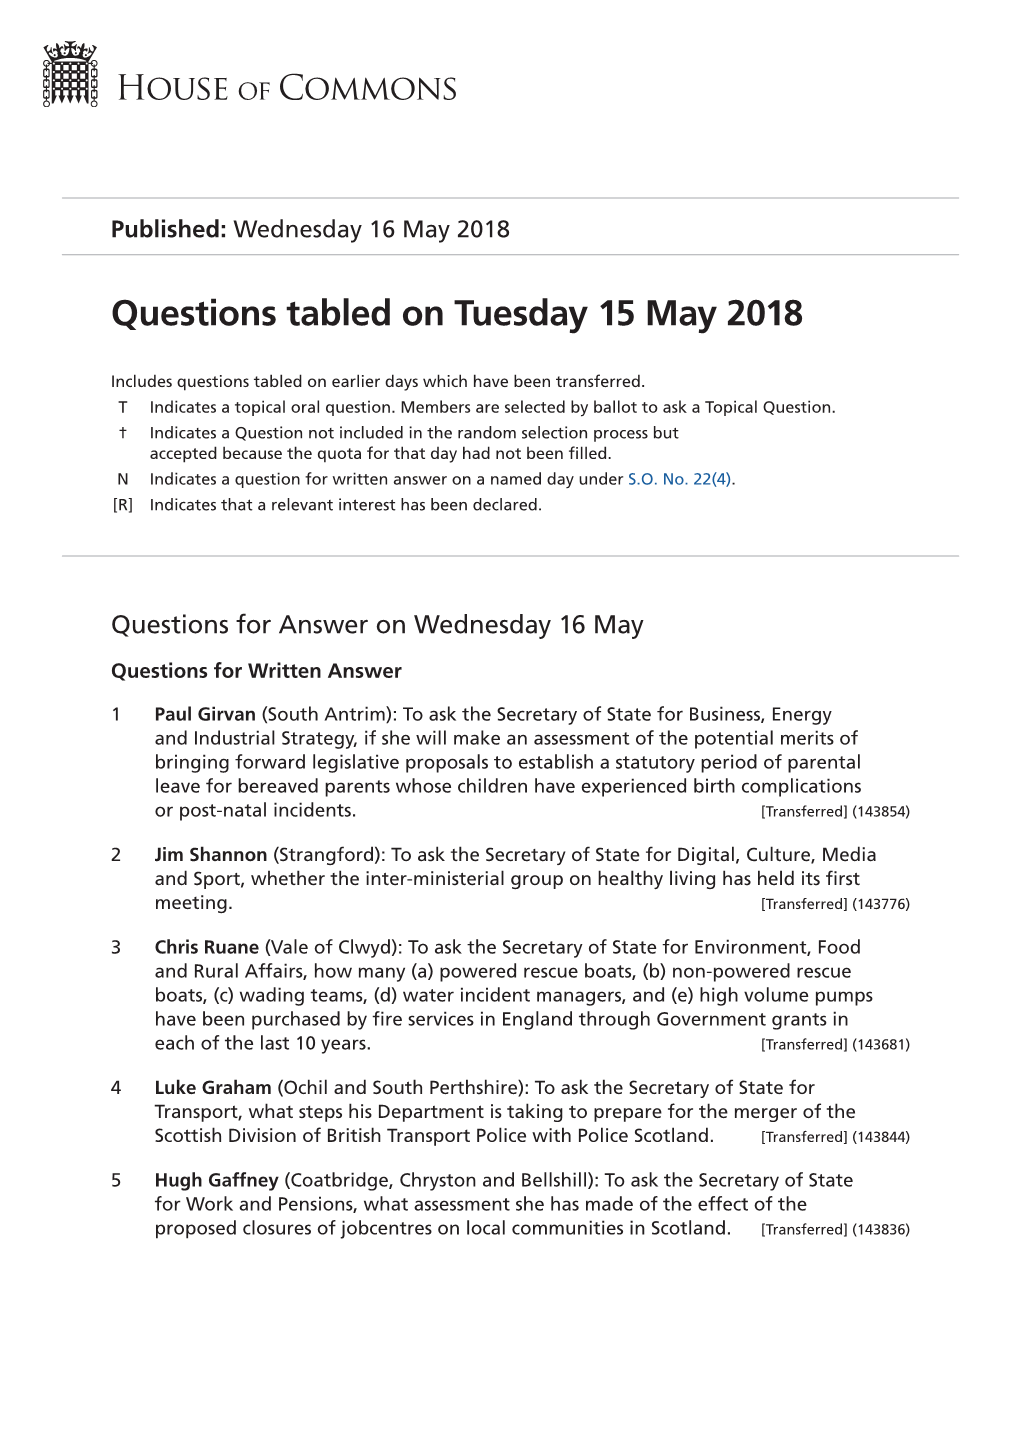 Questions Tabled on Tue 15 May 2018